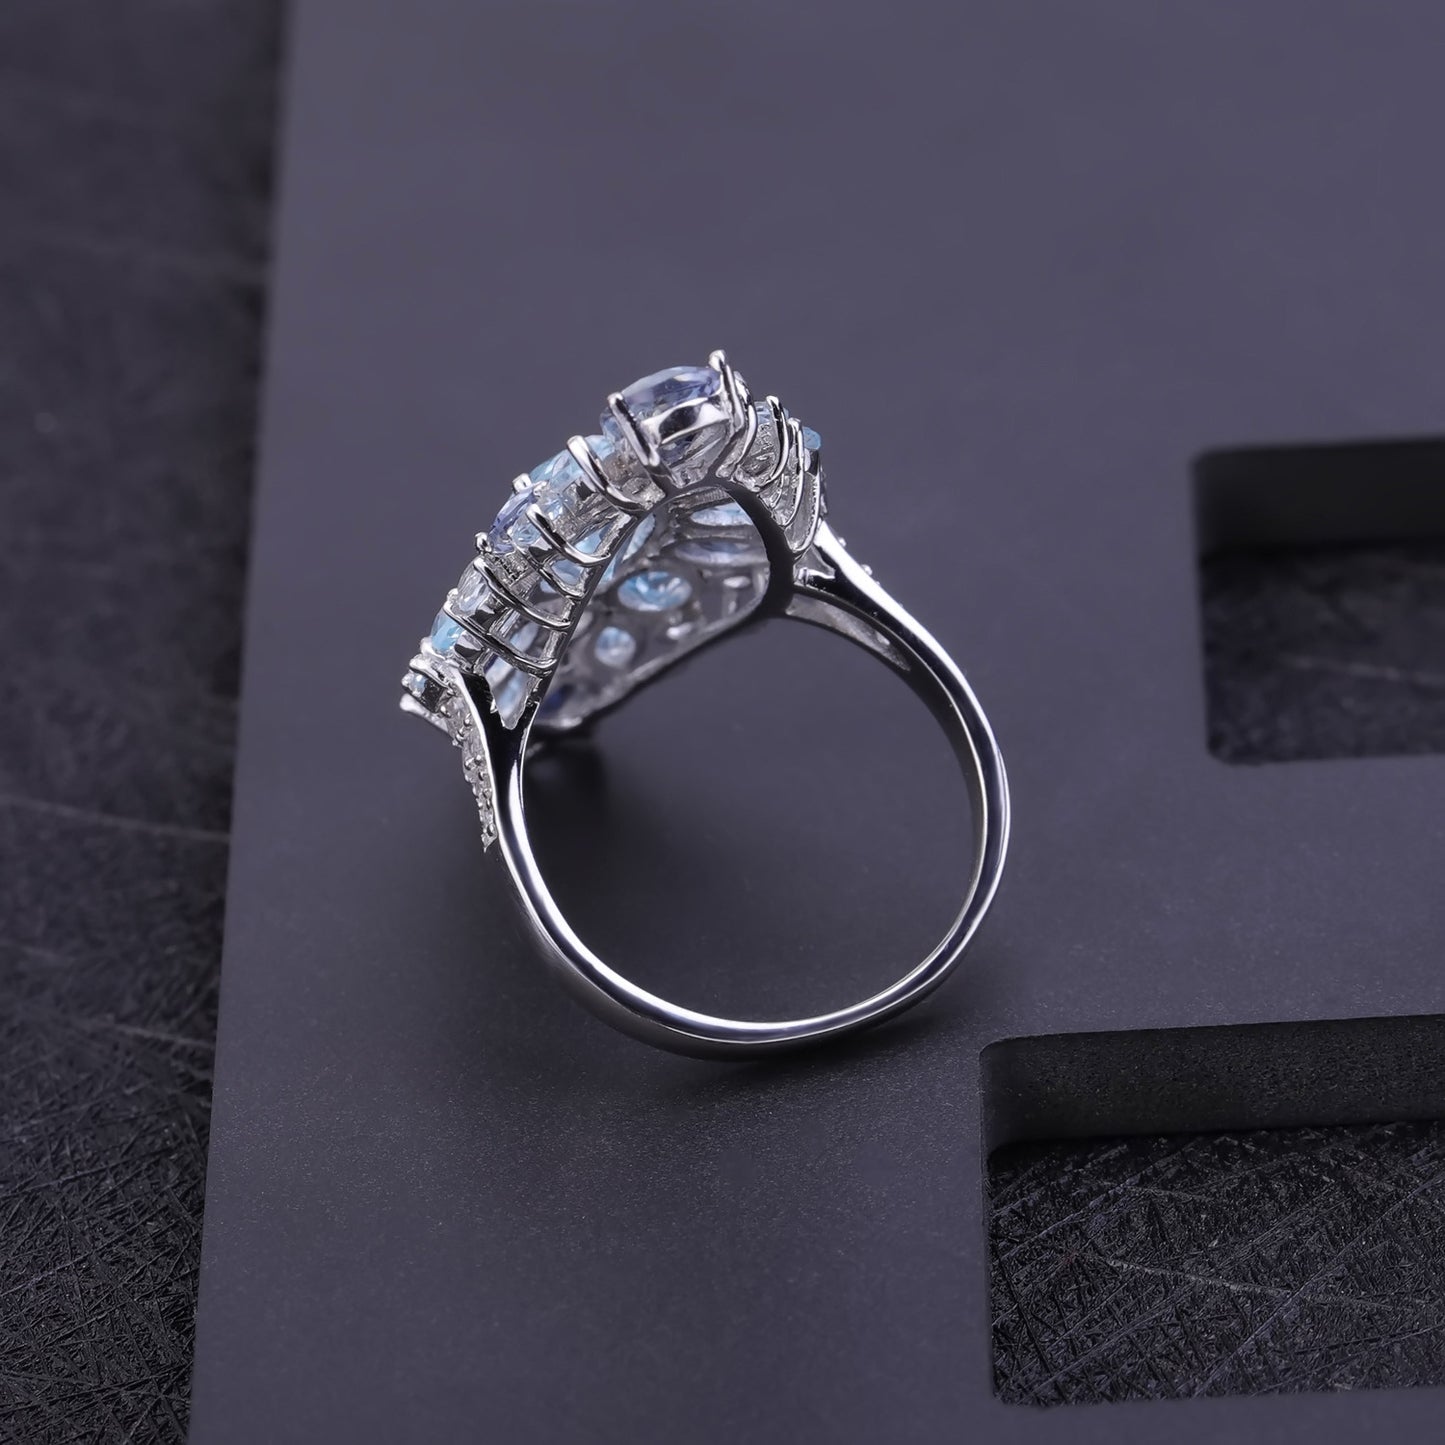 Luxury Atmosphere S925 Silver Natural Topaz Ring For Women